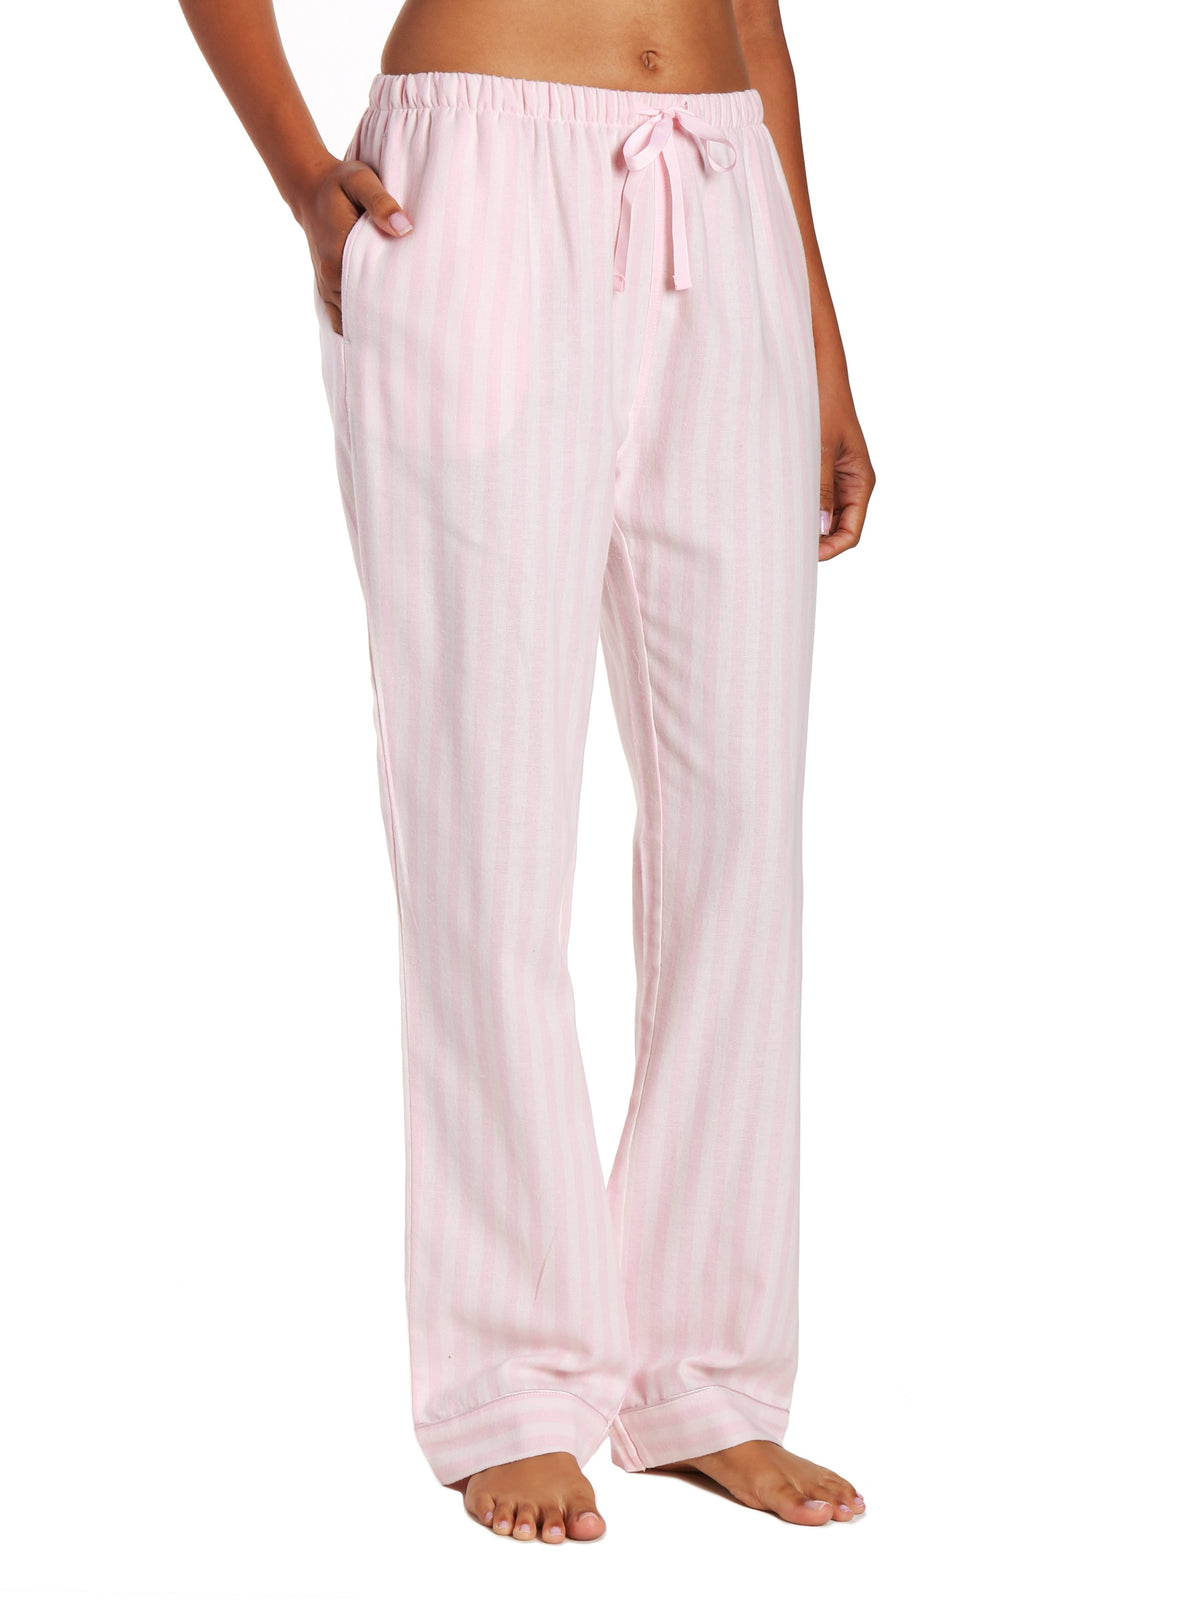 Womens 100% Cotton Lightweight Flannel Lounge Pants - Stripes Pink